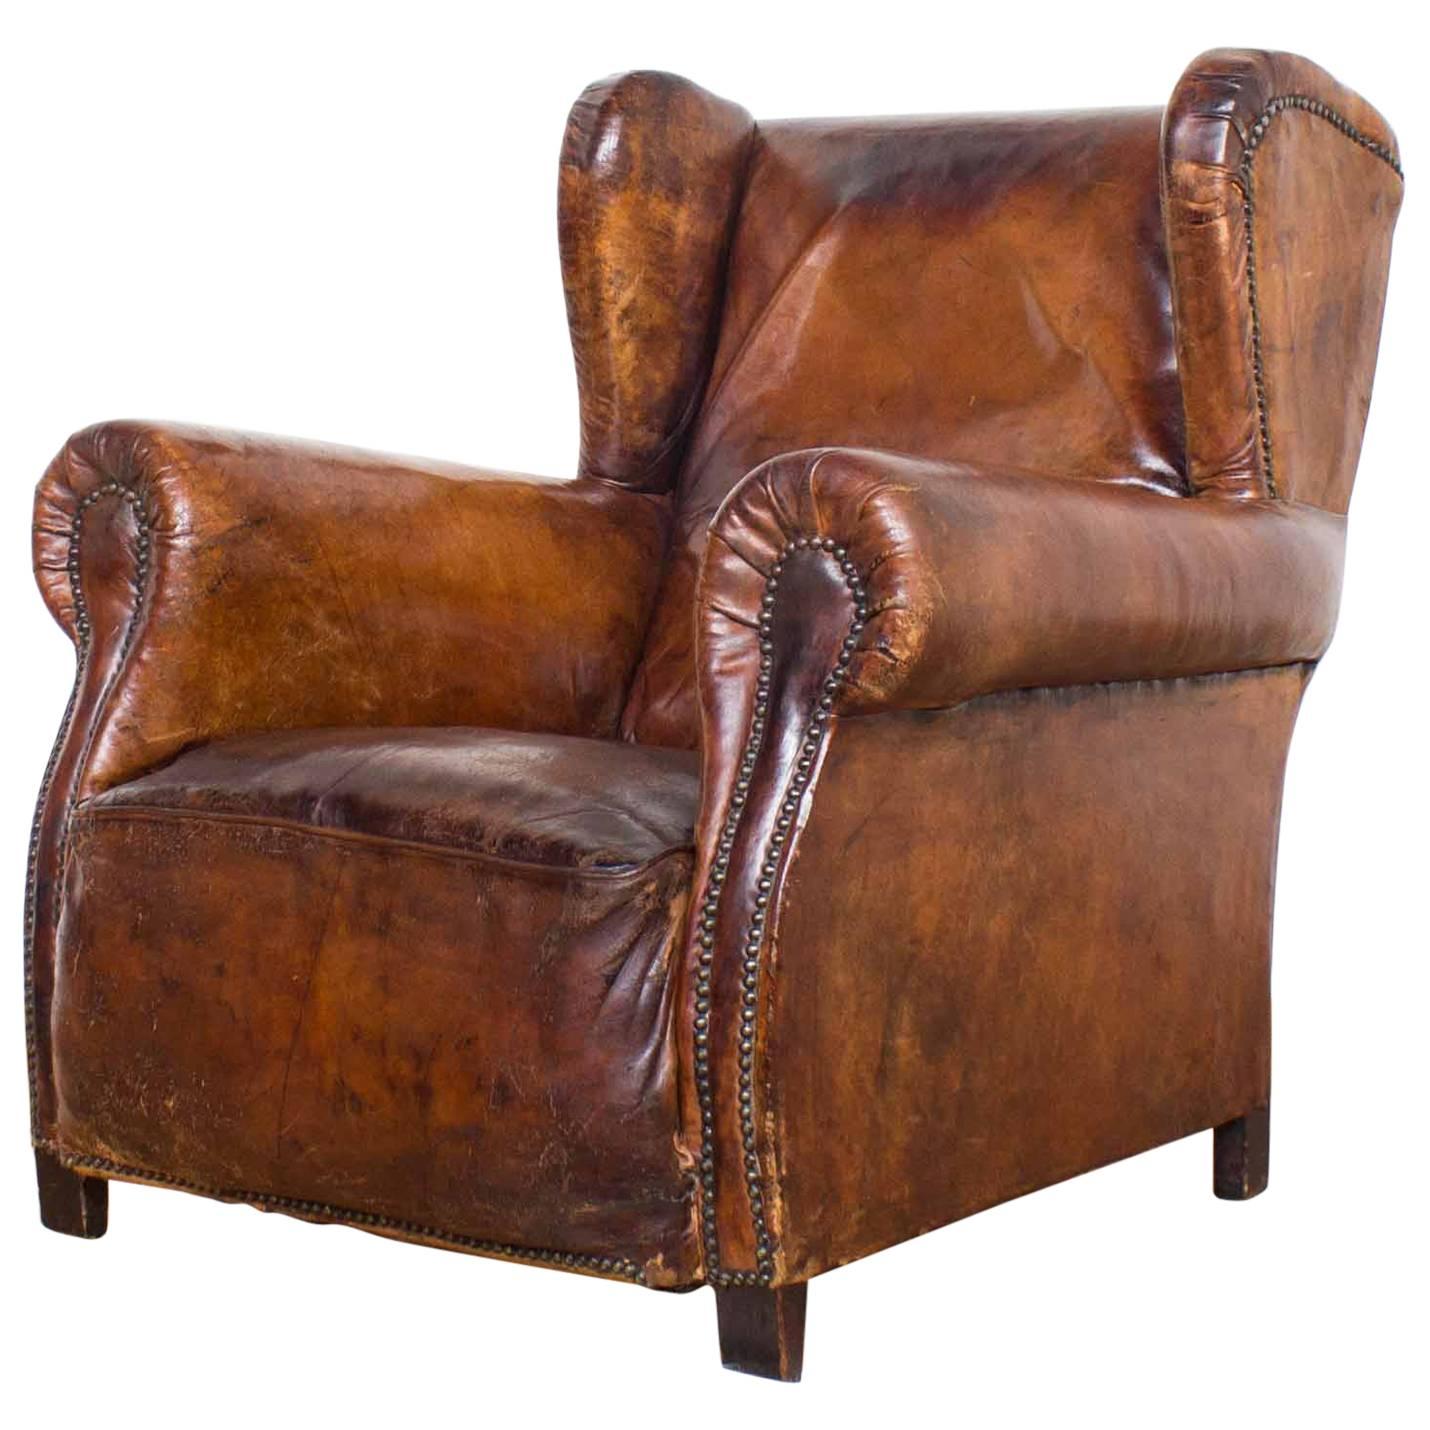 Vintage Cognac Leather Wing Back Club Chair